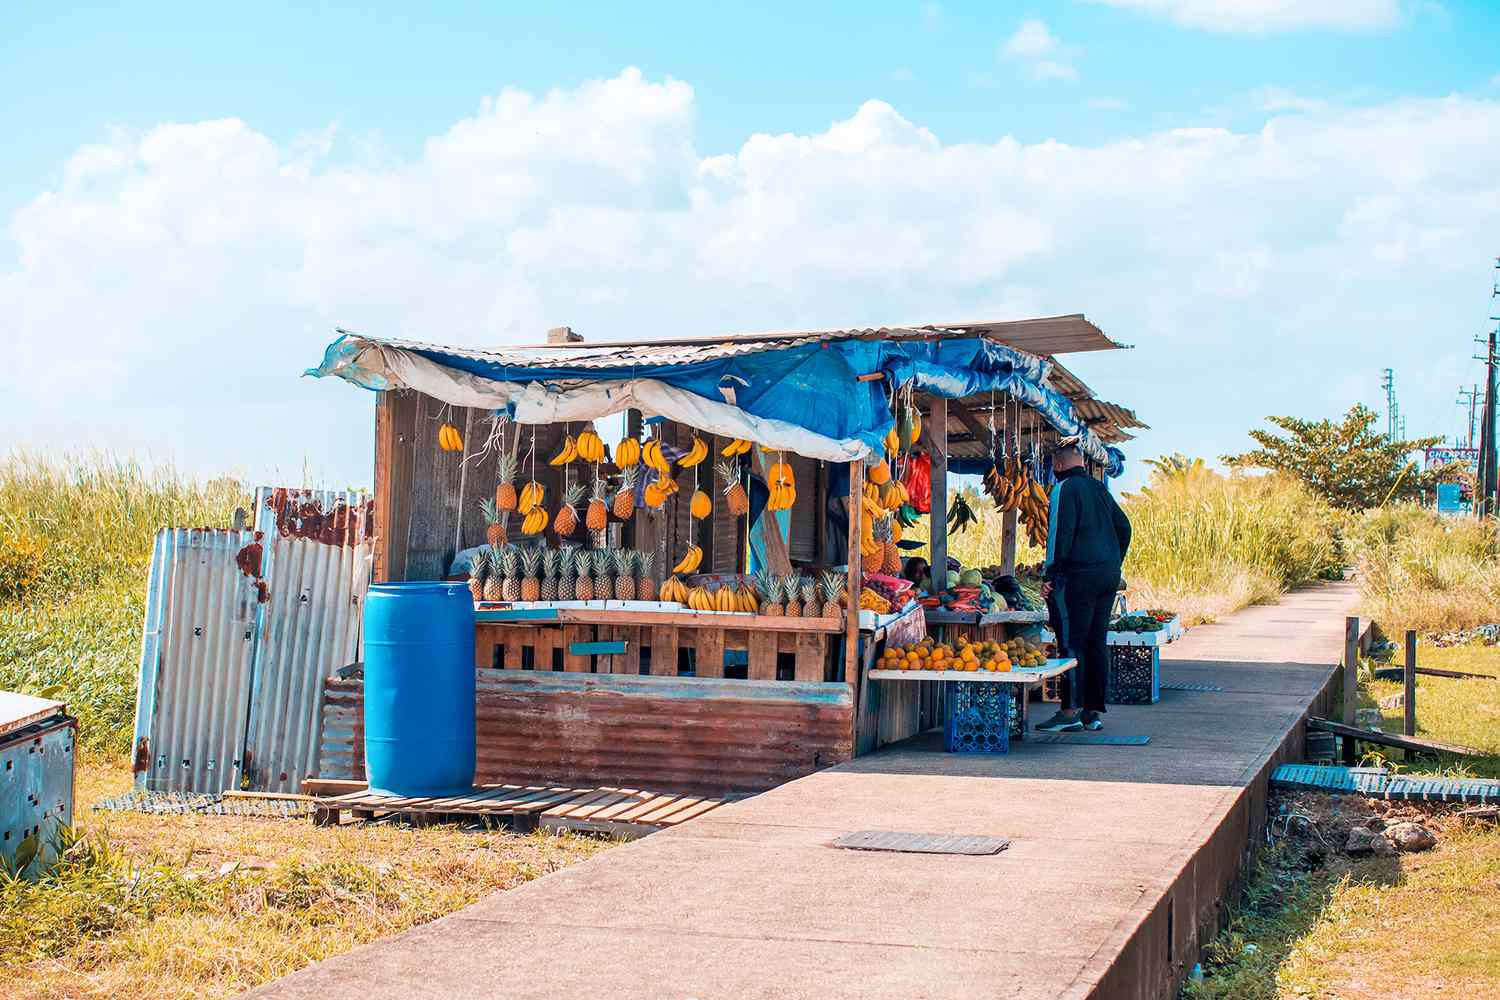 fruit stand in a rural setting